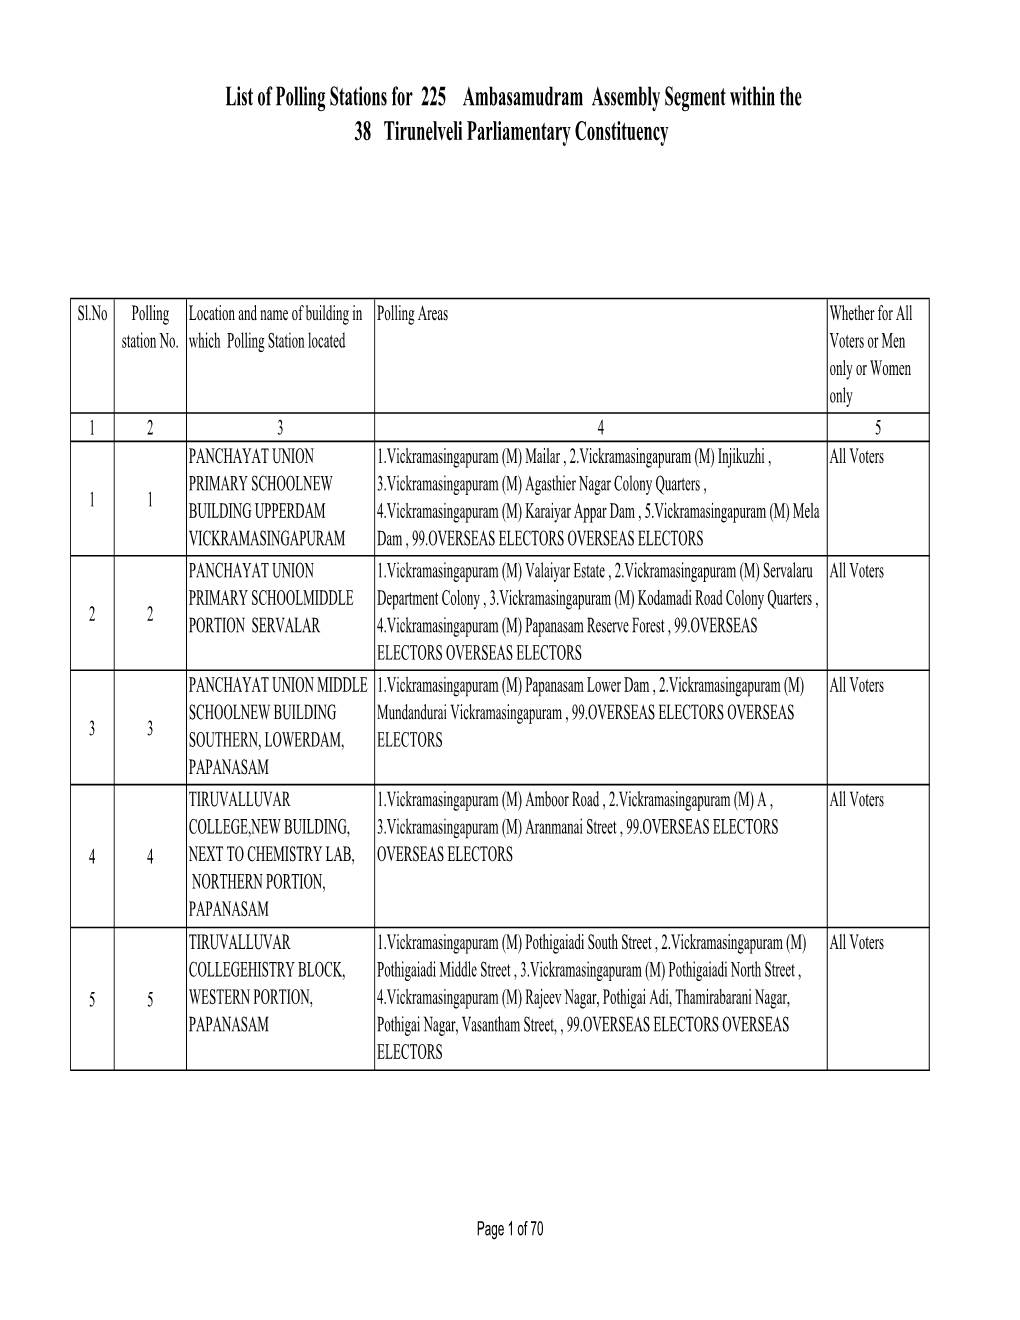 List of Polling Stations for 225 Ambasamudram Assembly Segment Within the 38 Tirunelveli Parliamentary Constituency